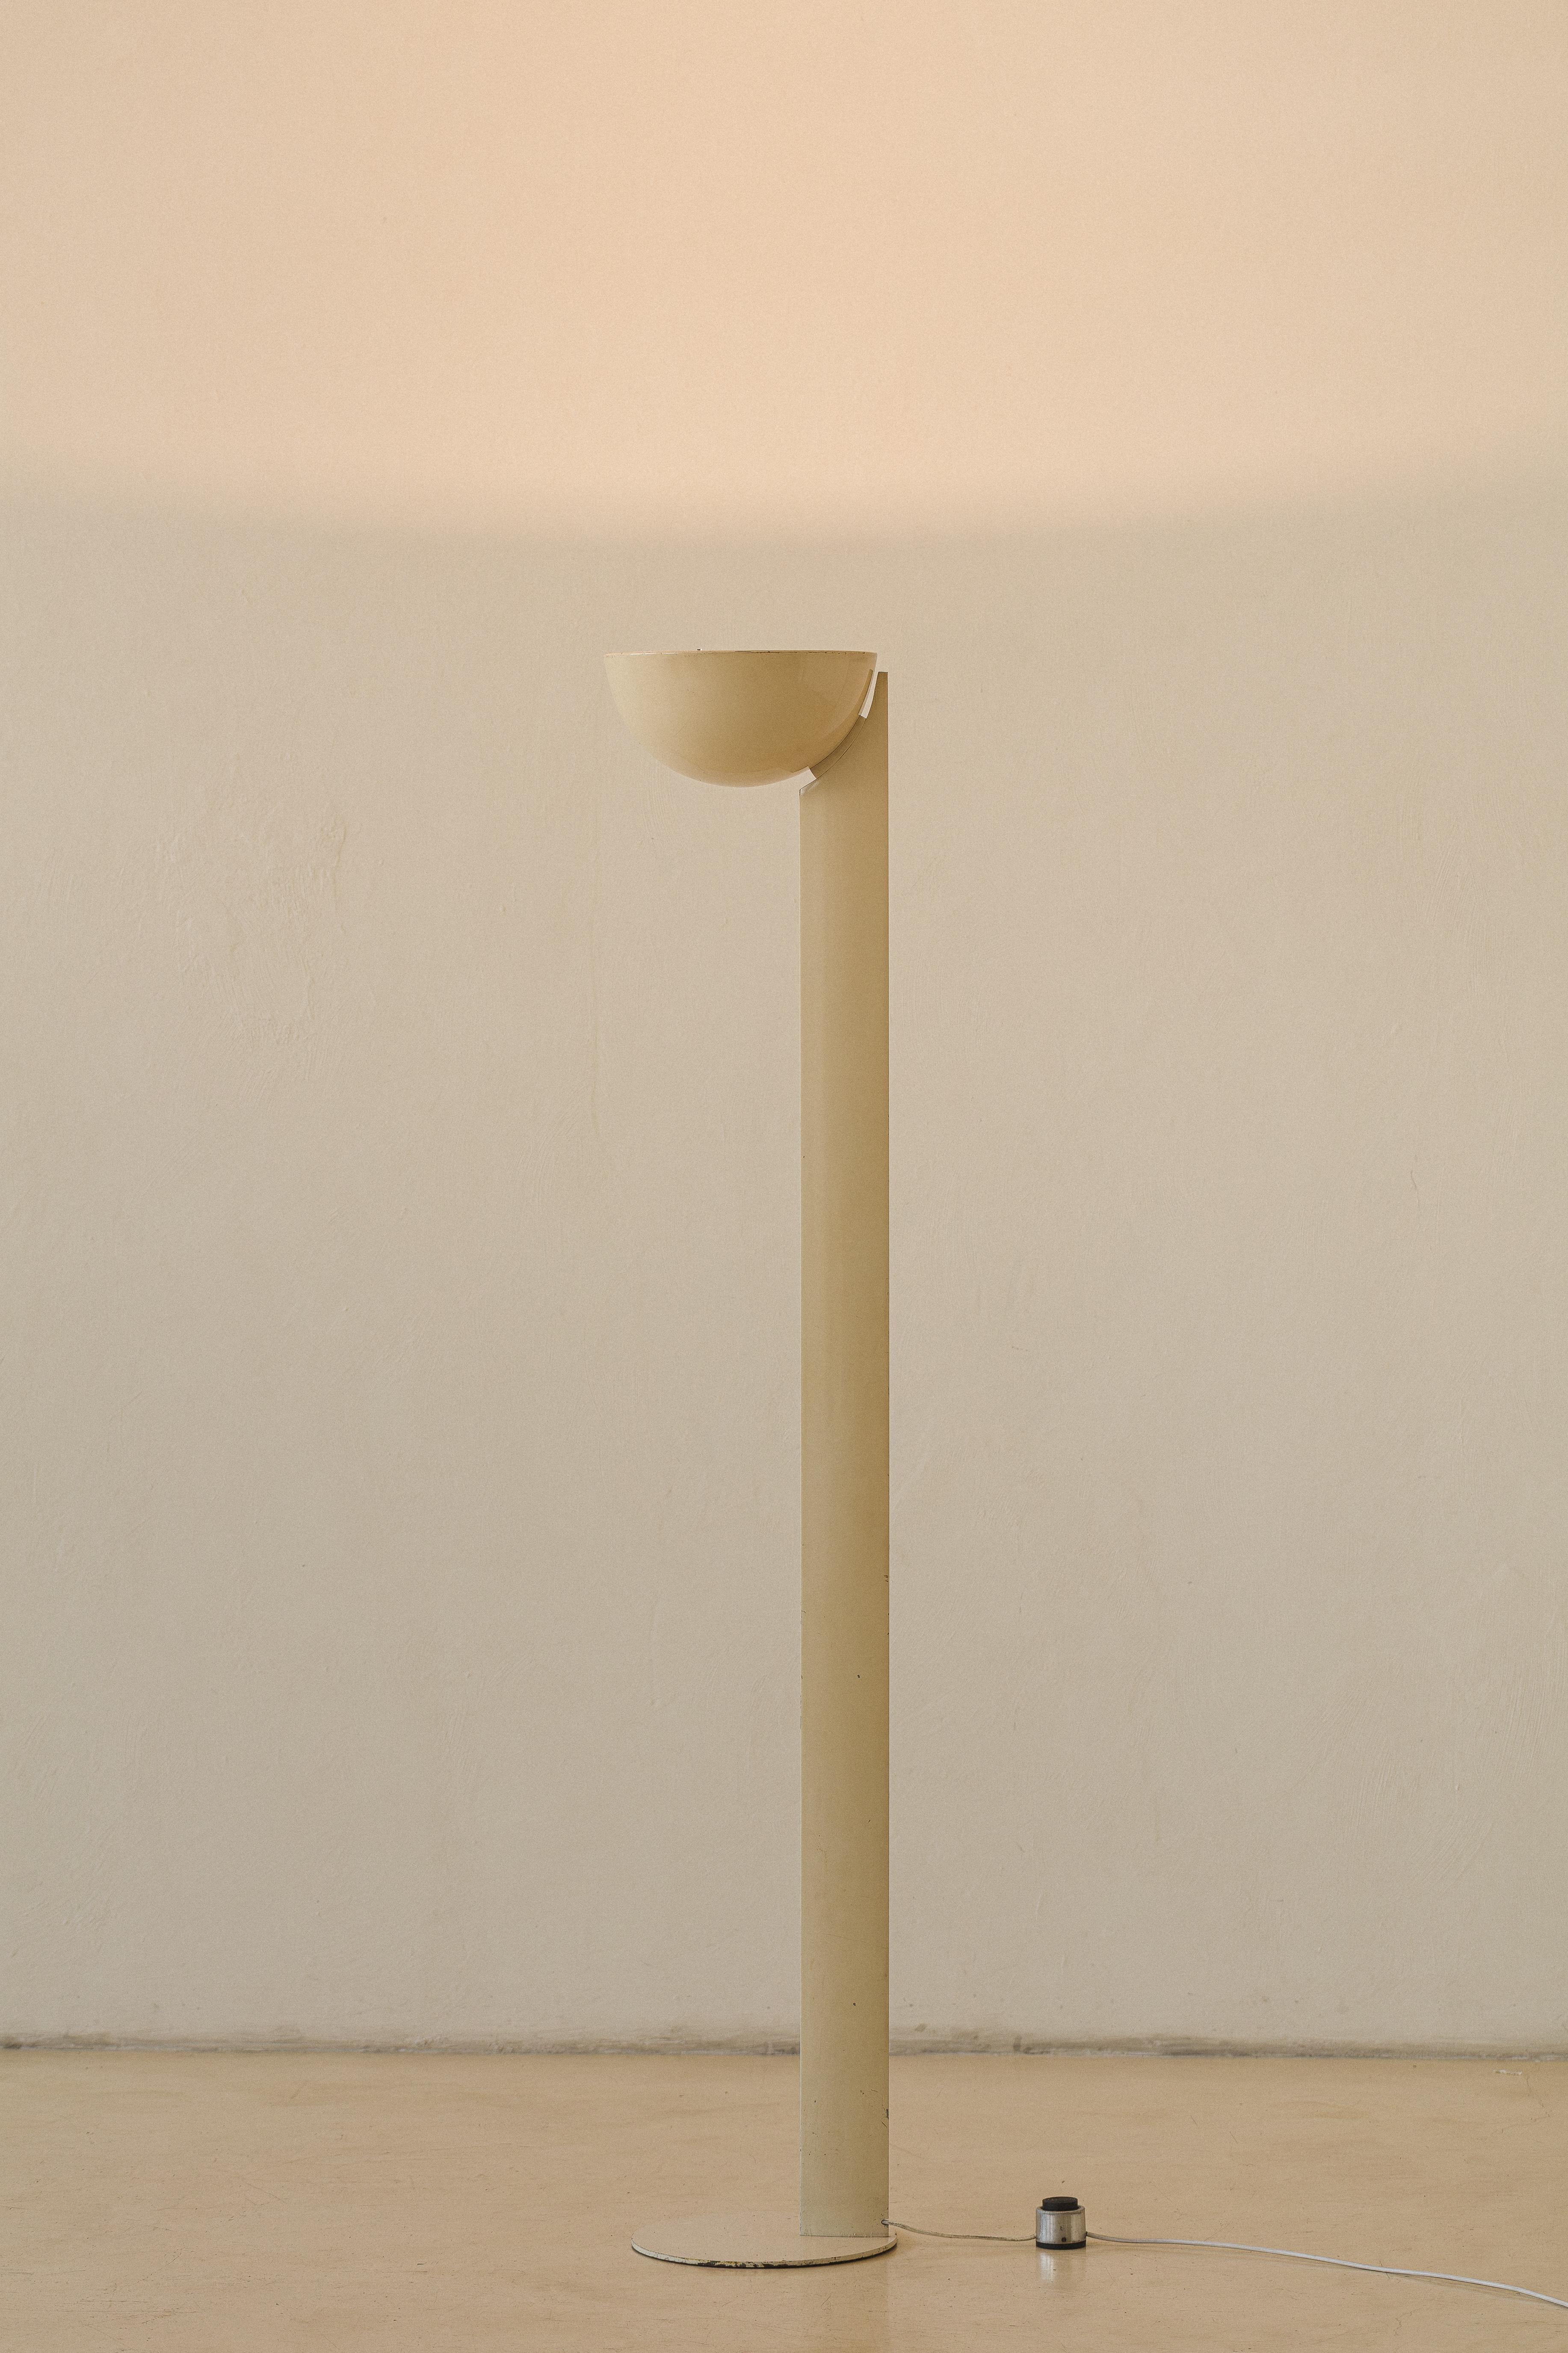 This floor lamp was designed by Enrico Furio (1909 – 2010) in the 1950s and produced by his company Dominici. Made of aluminum, the lamp is preserved in its original condition and features a singular tower and dome that throws light upwards. With